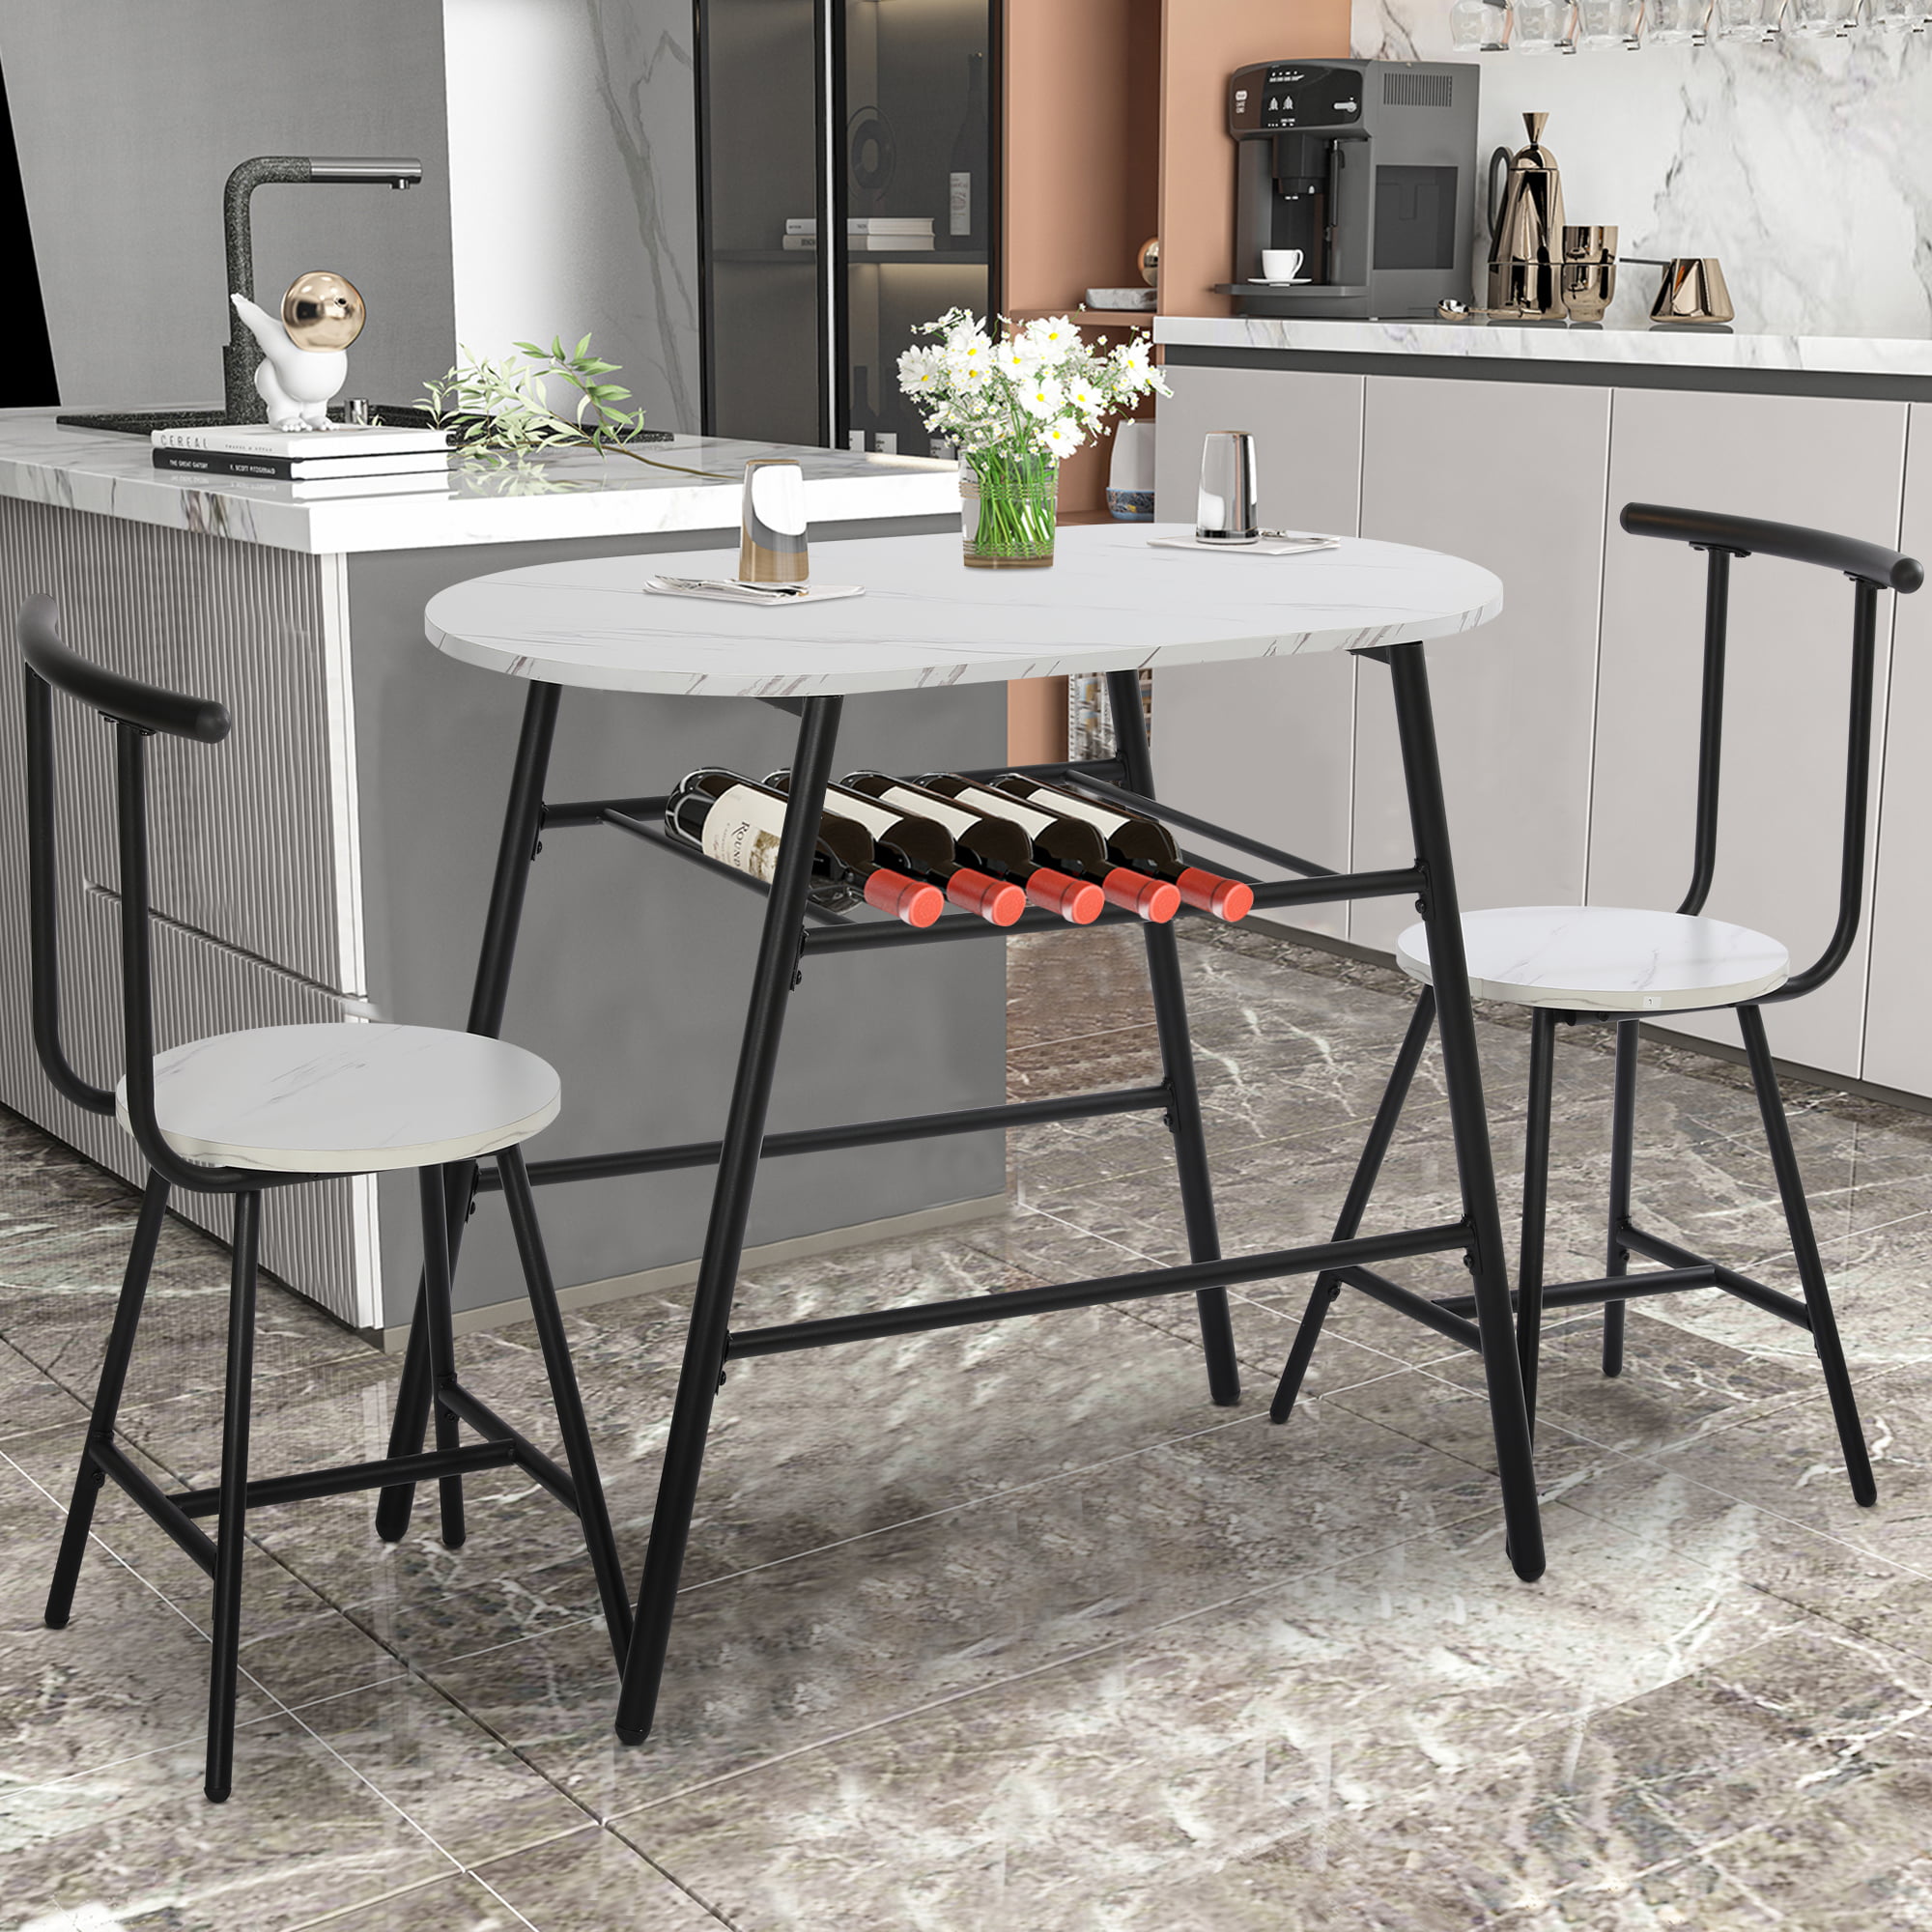 Mieres Small Dining Table Set for 2, Home Kitchen Furniture Perfect Choice, Compact & Durable, Easy Assembly, White Beige, Stools